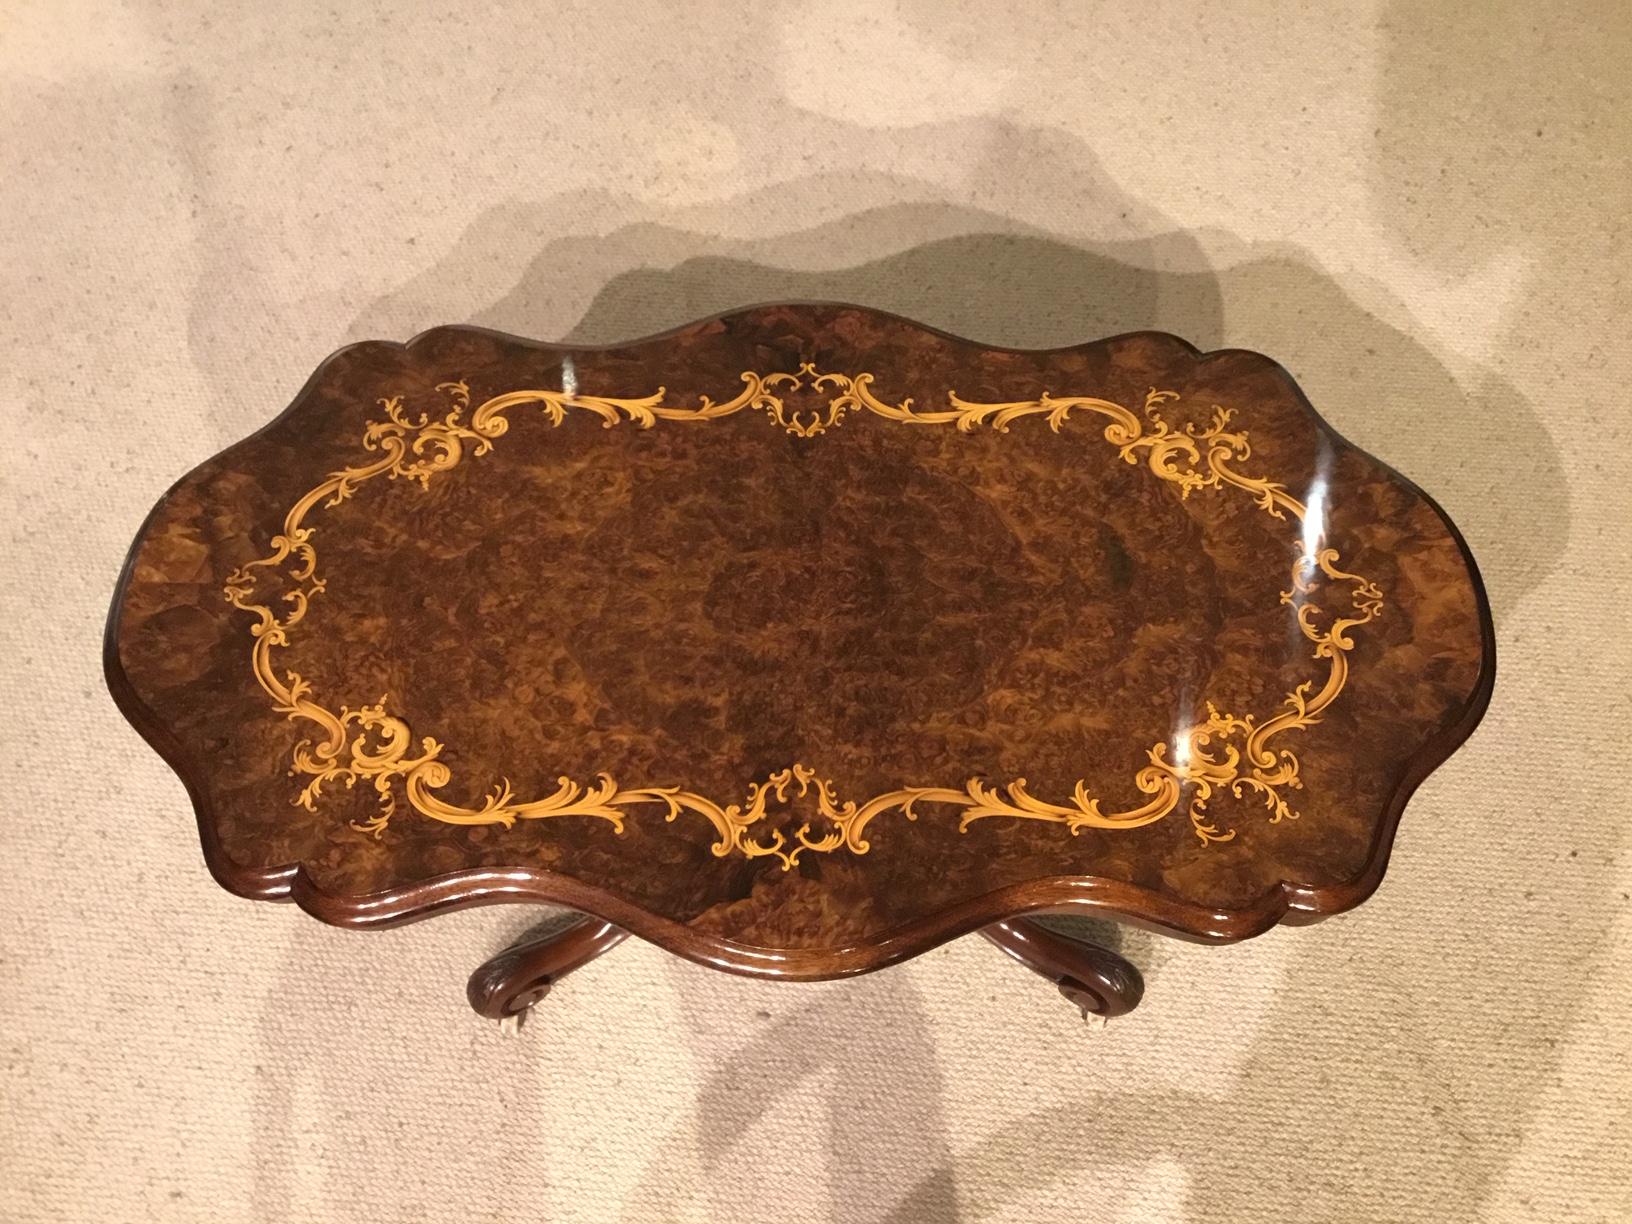 A beautiful burr walnut Victorian shaped coffee table. Having a shaped top in beautifully figured burr walnut with a floral marquetry inlaid border. Supported on a 'basket' walnut base with carved cabriole supports and brass and porcelain castors.